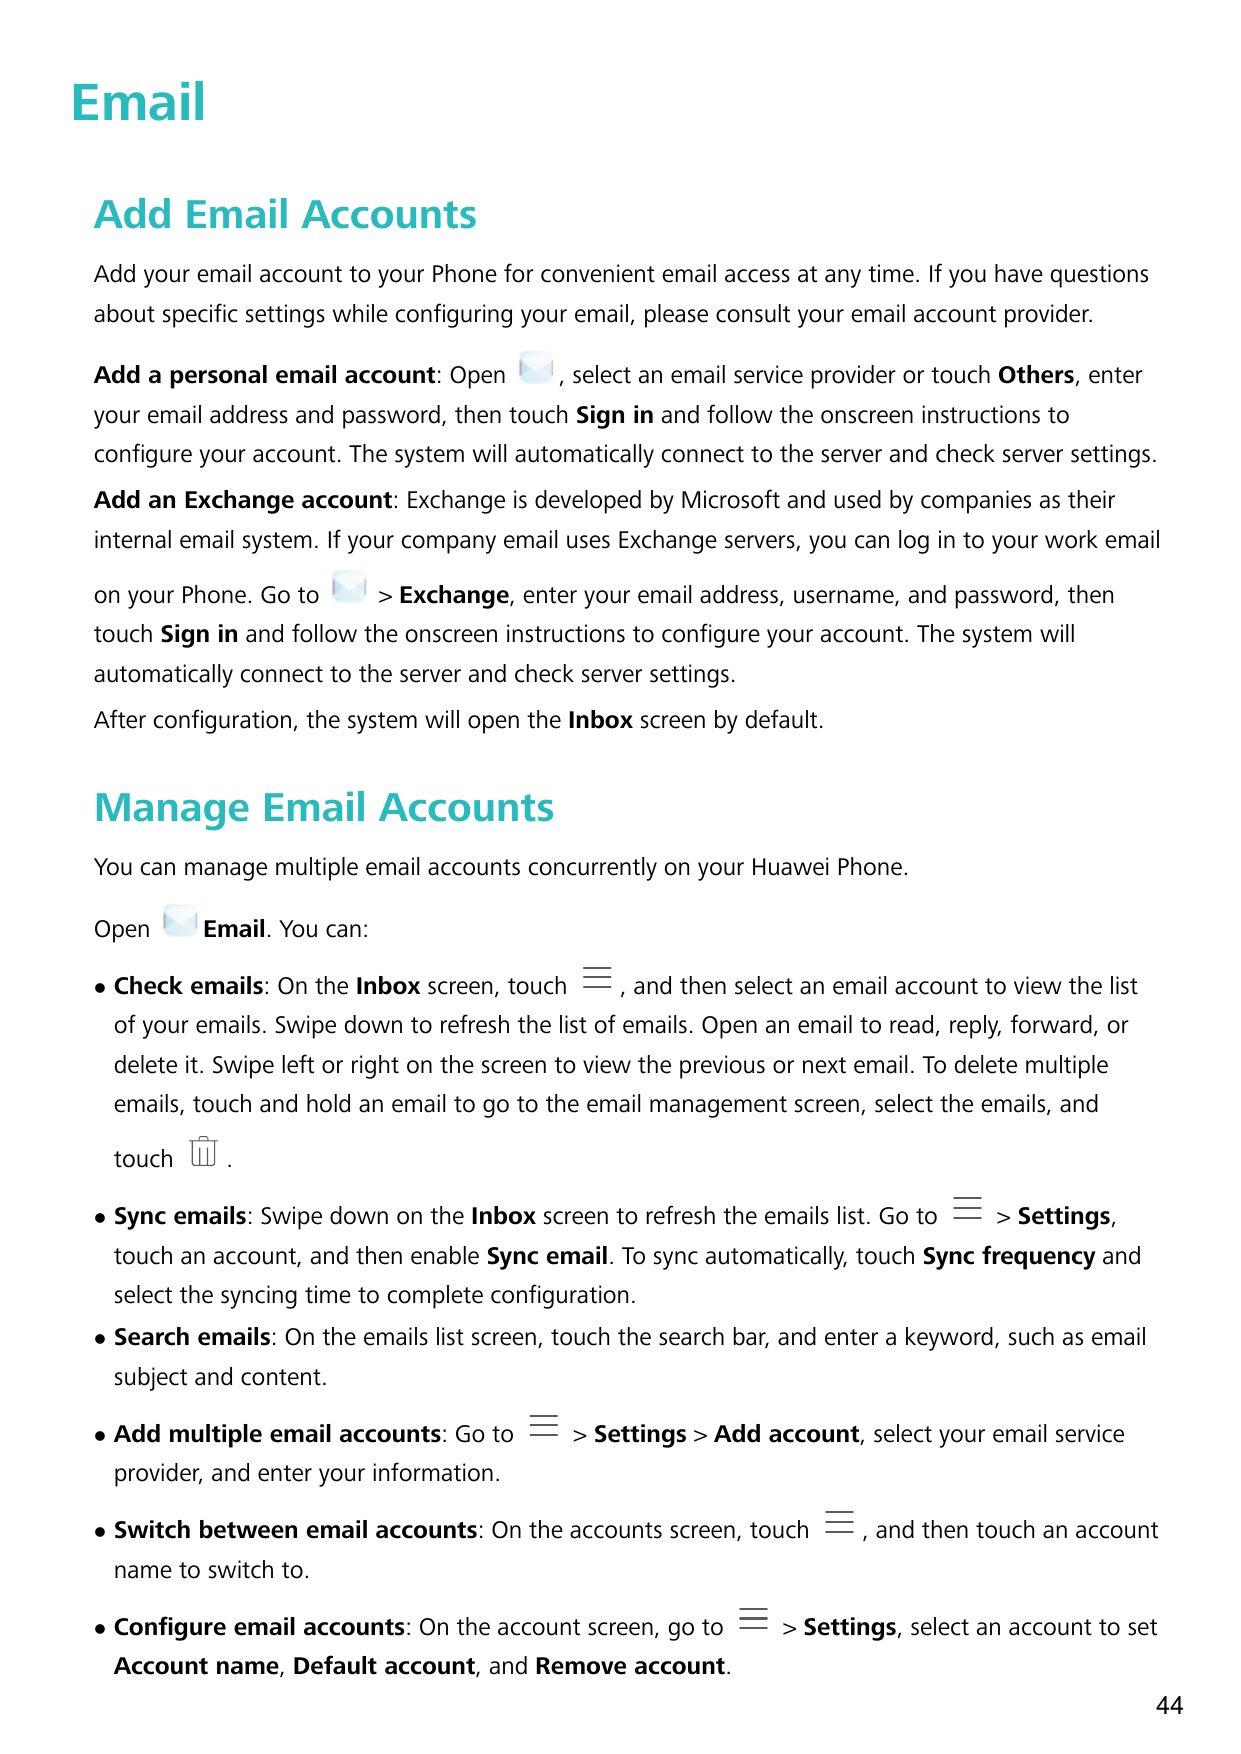 EmailAdd Email AccountsAdd your email account to your Phone for convenient email access at any time. If you have questionsabout 